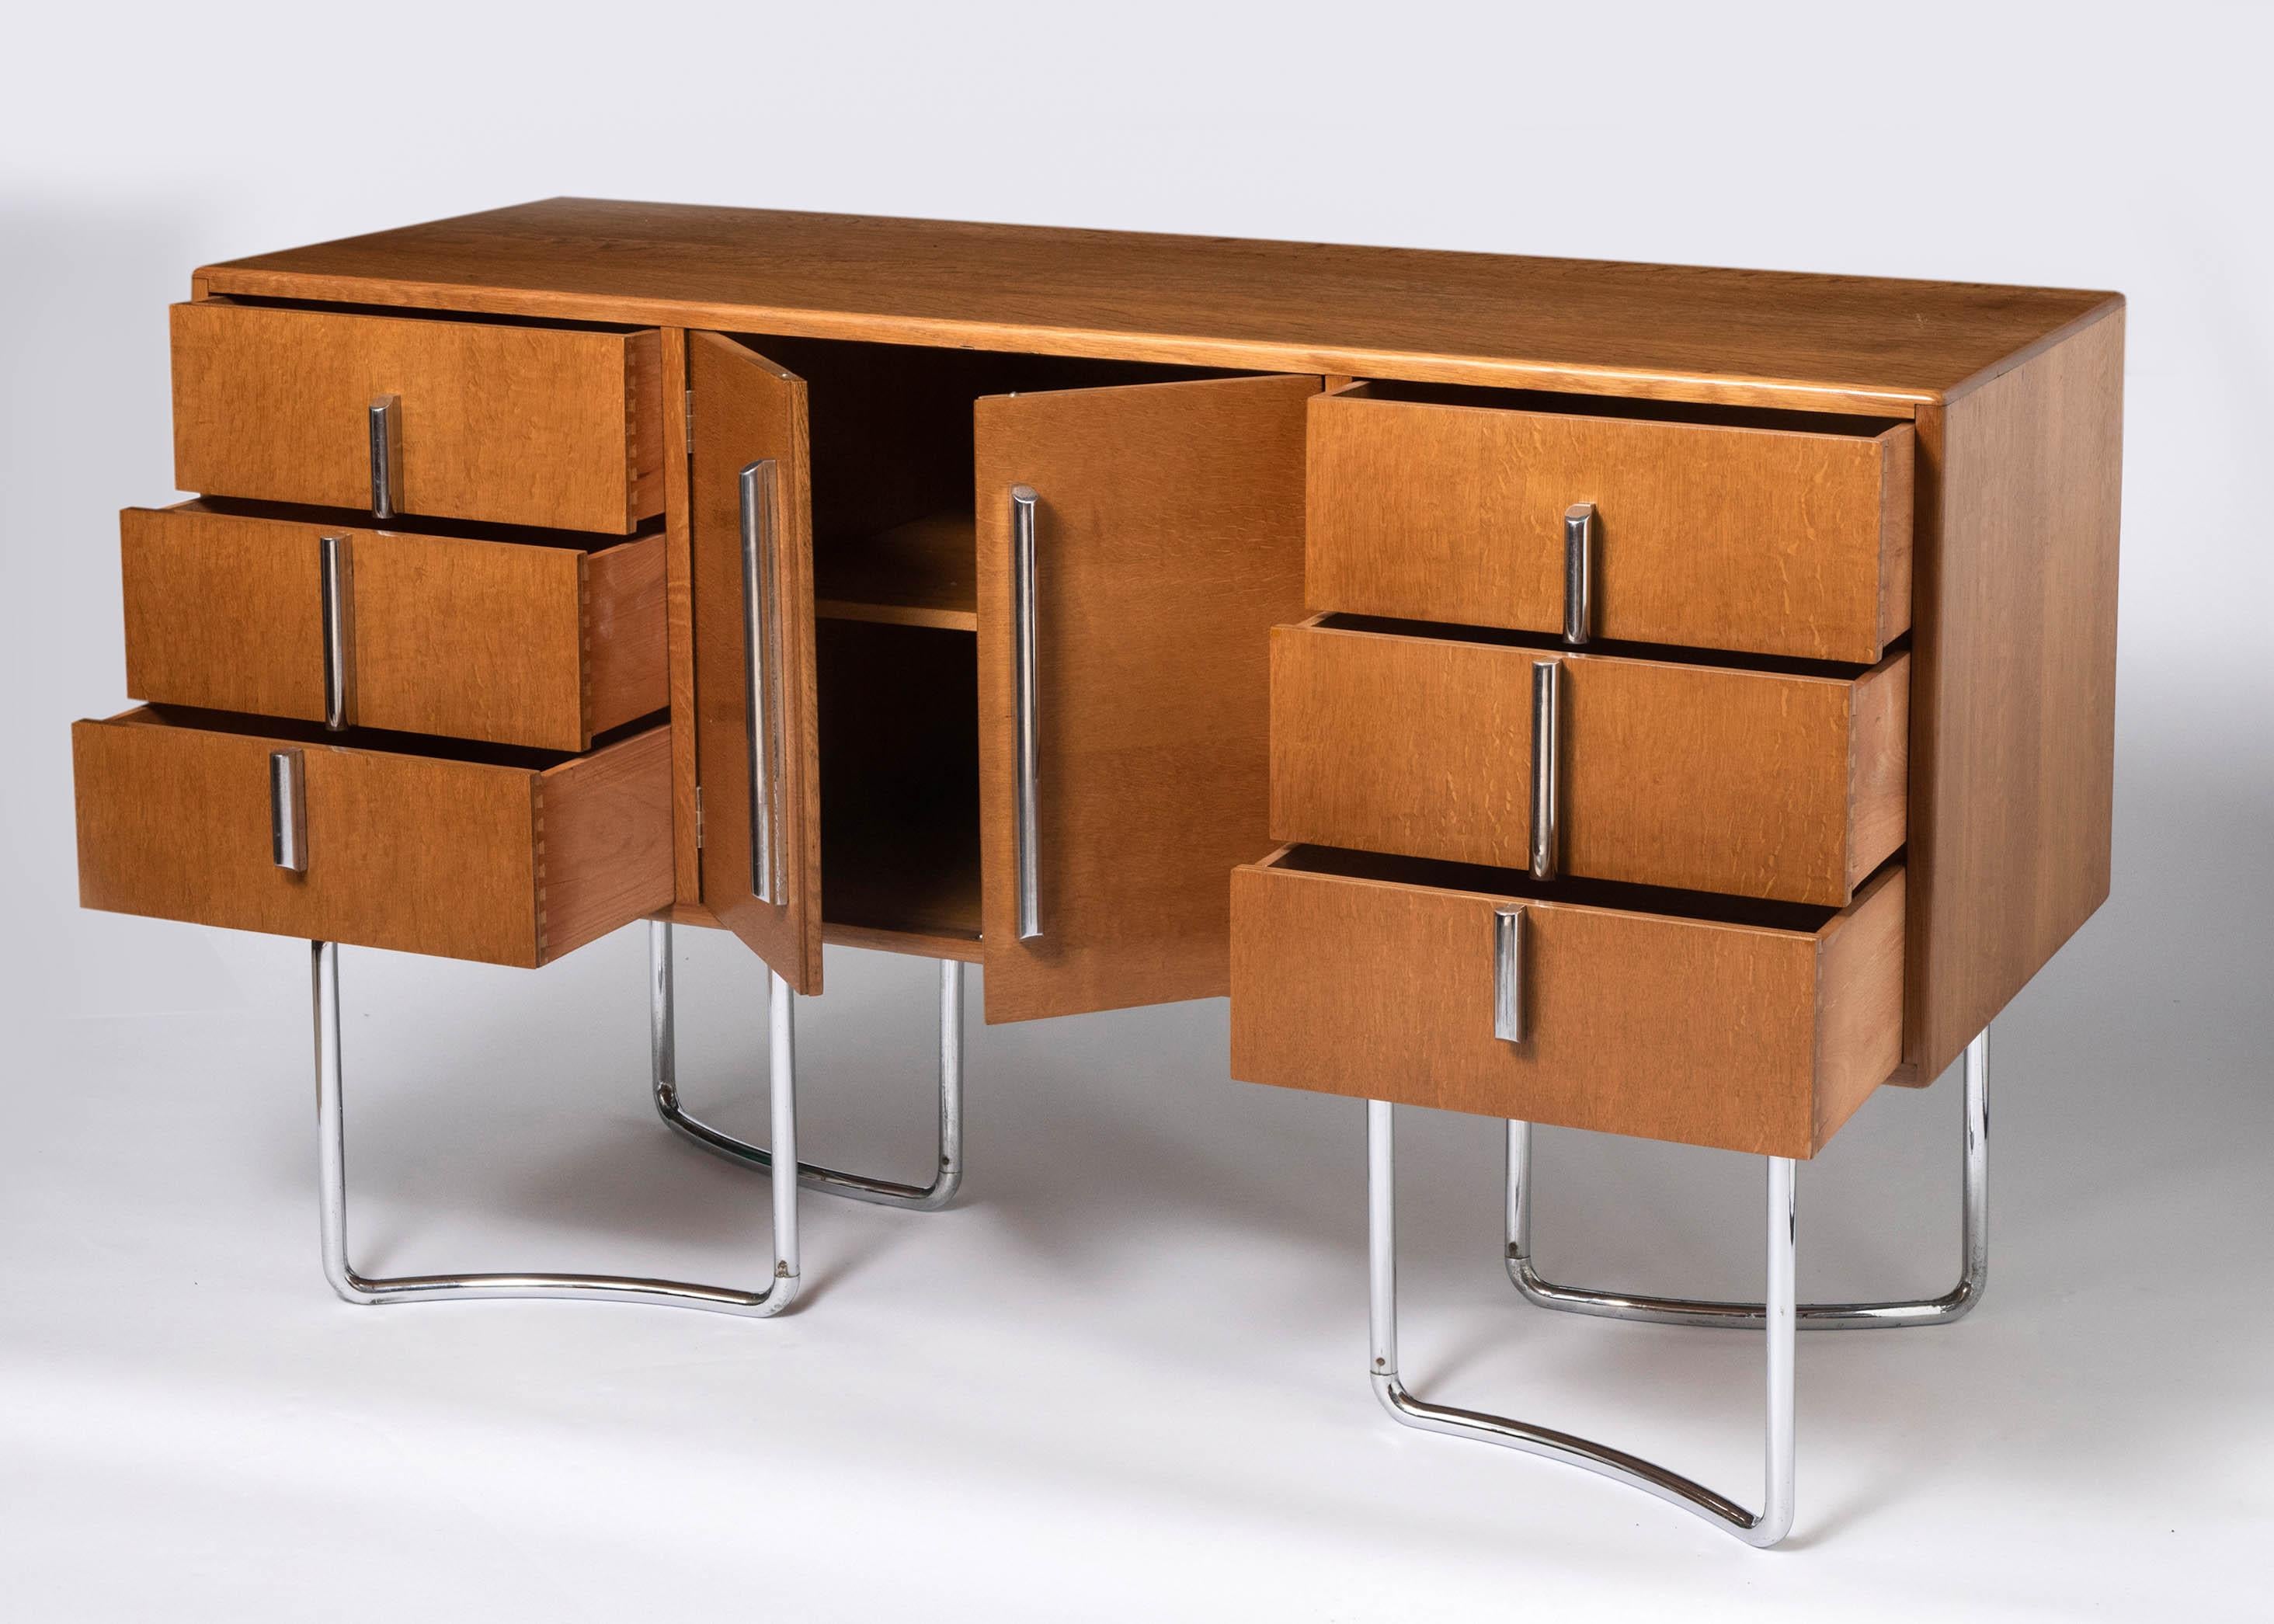 A matching rare P.E.L (Practical Equipment Limited) British modernist sideboard.
Designed by designer/ Architect Oliver Bernard
Veneered plywood body with twin panelled doors flanked by 3 drawers either side. Raised on tubular chrome plated steel